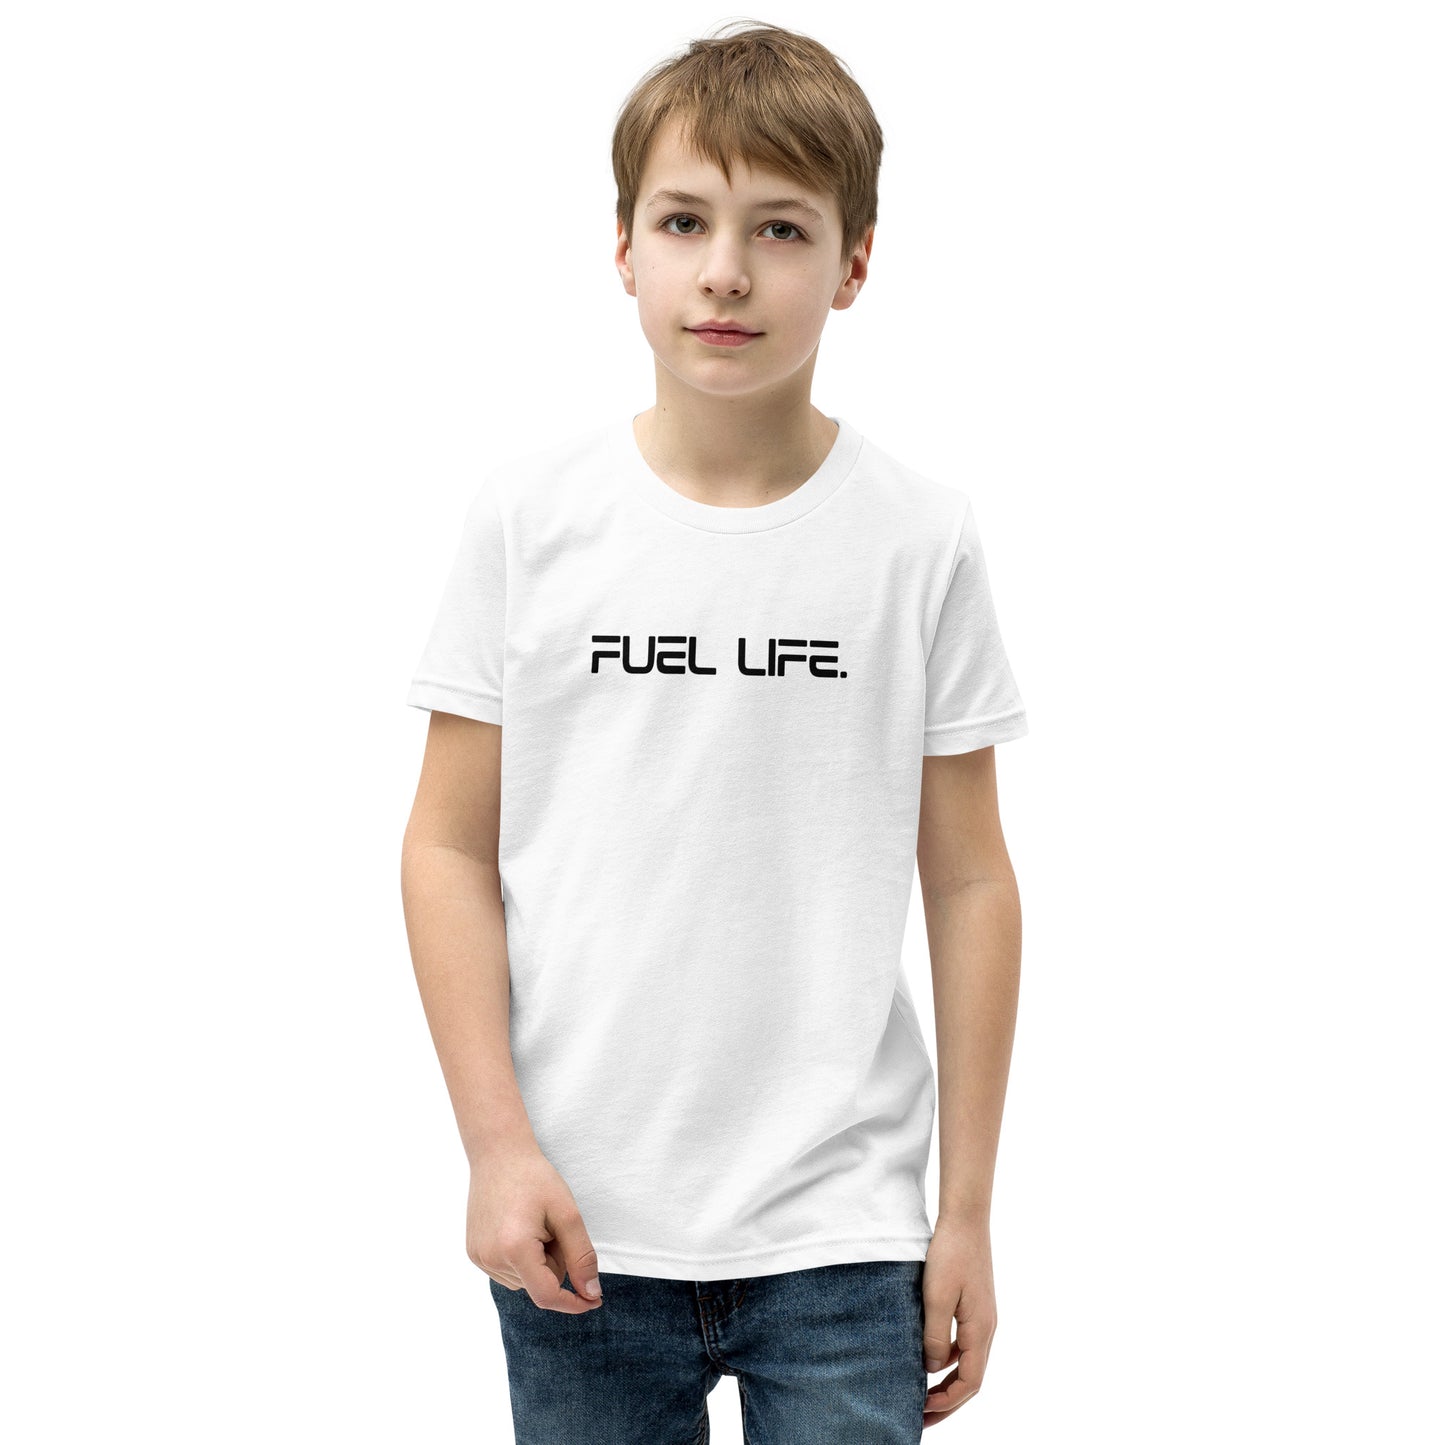 Fuel Life Youth Tee